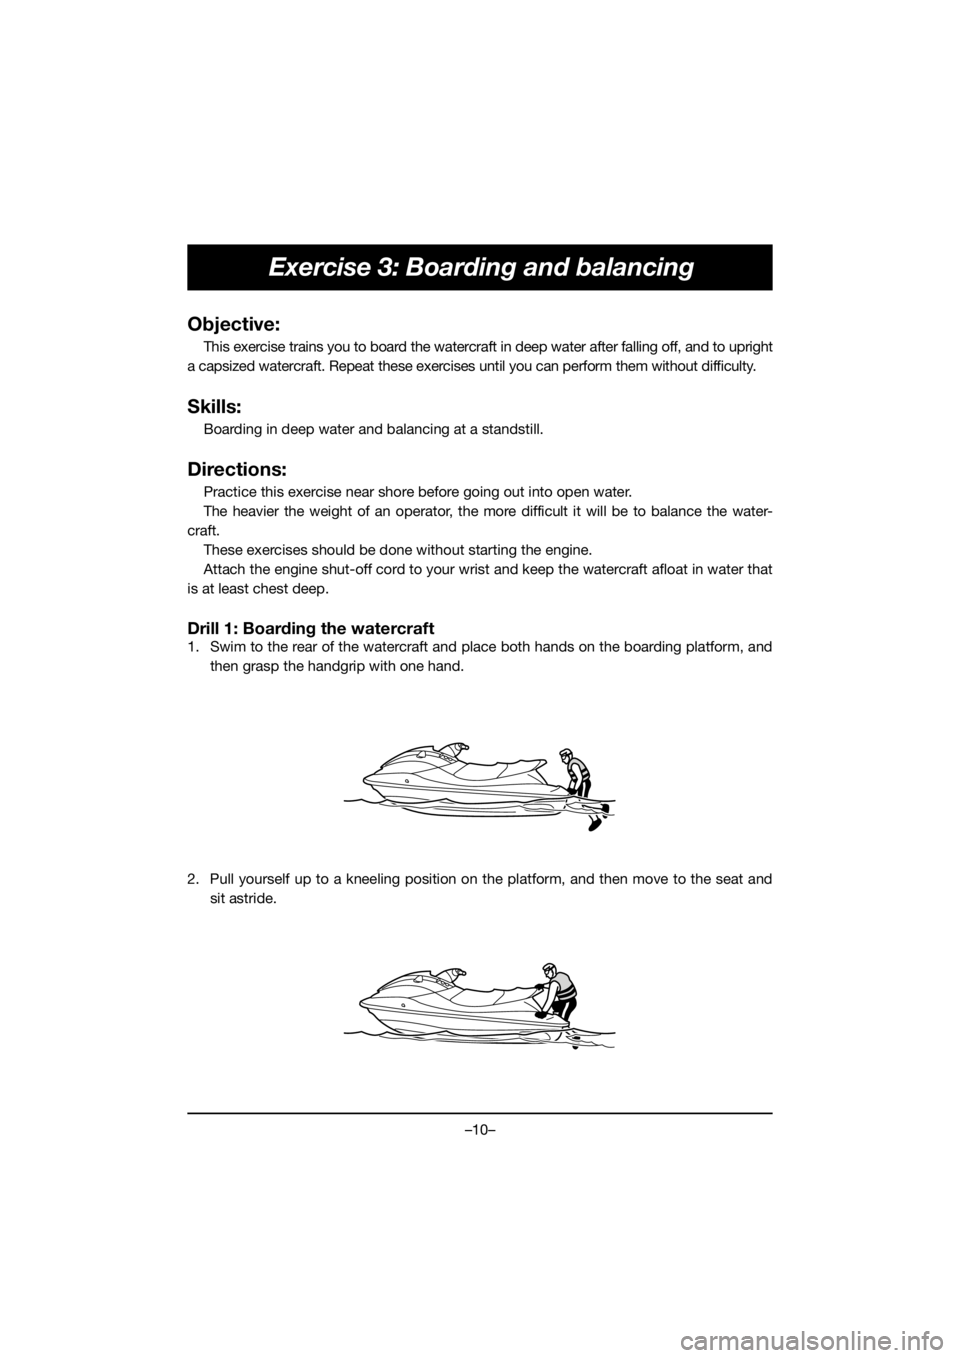 YAMAHA EX 2019  Bruksanvisningar (in Swedish) –10–
Exercise 3: Boarding and balancing
Objective:
This exercise trains you to board the watercraft in deep water after falling off, and to upright
a capsized watercraft. Repeat these exercises un